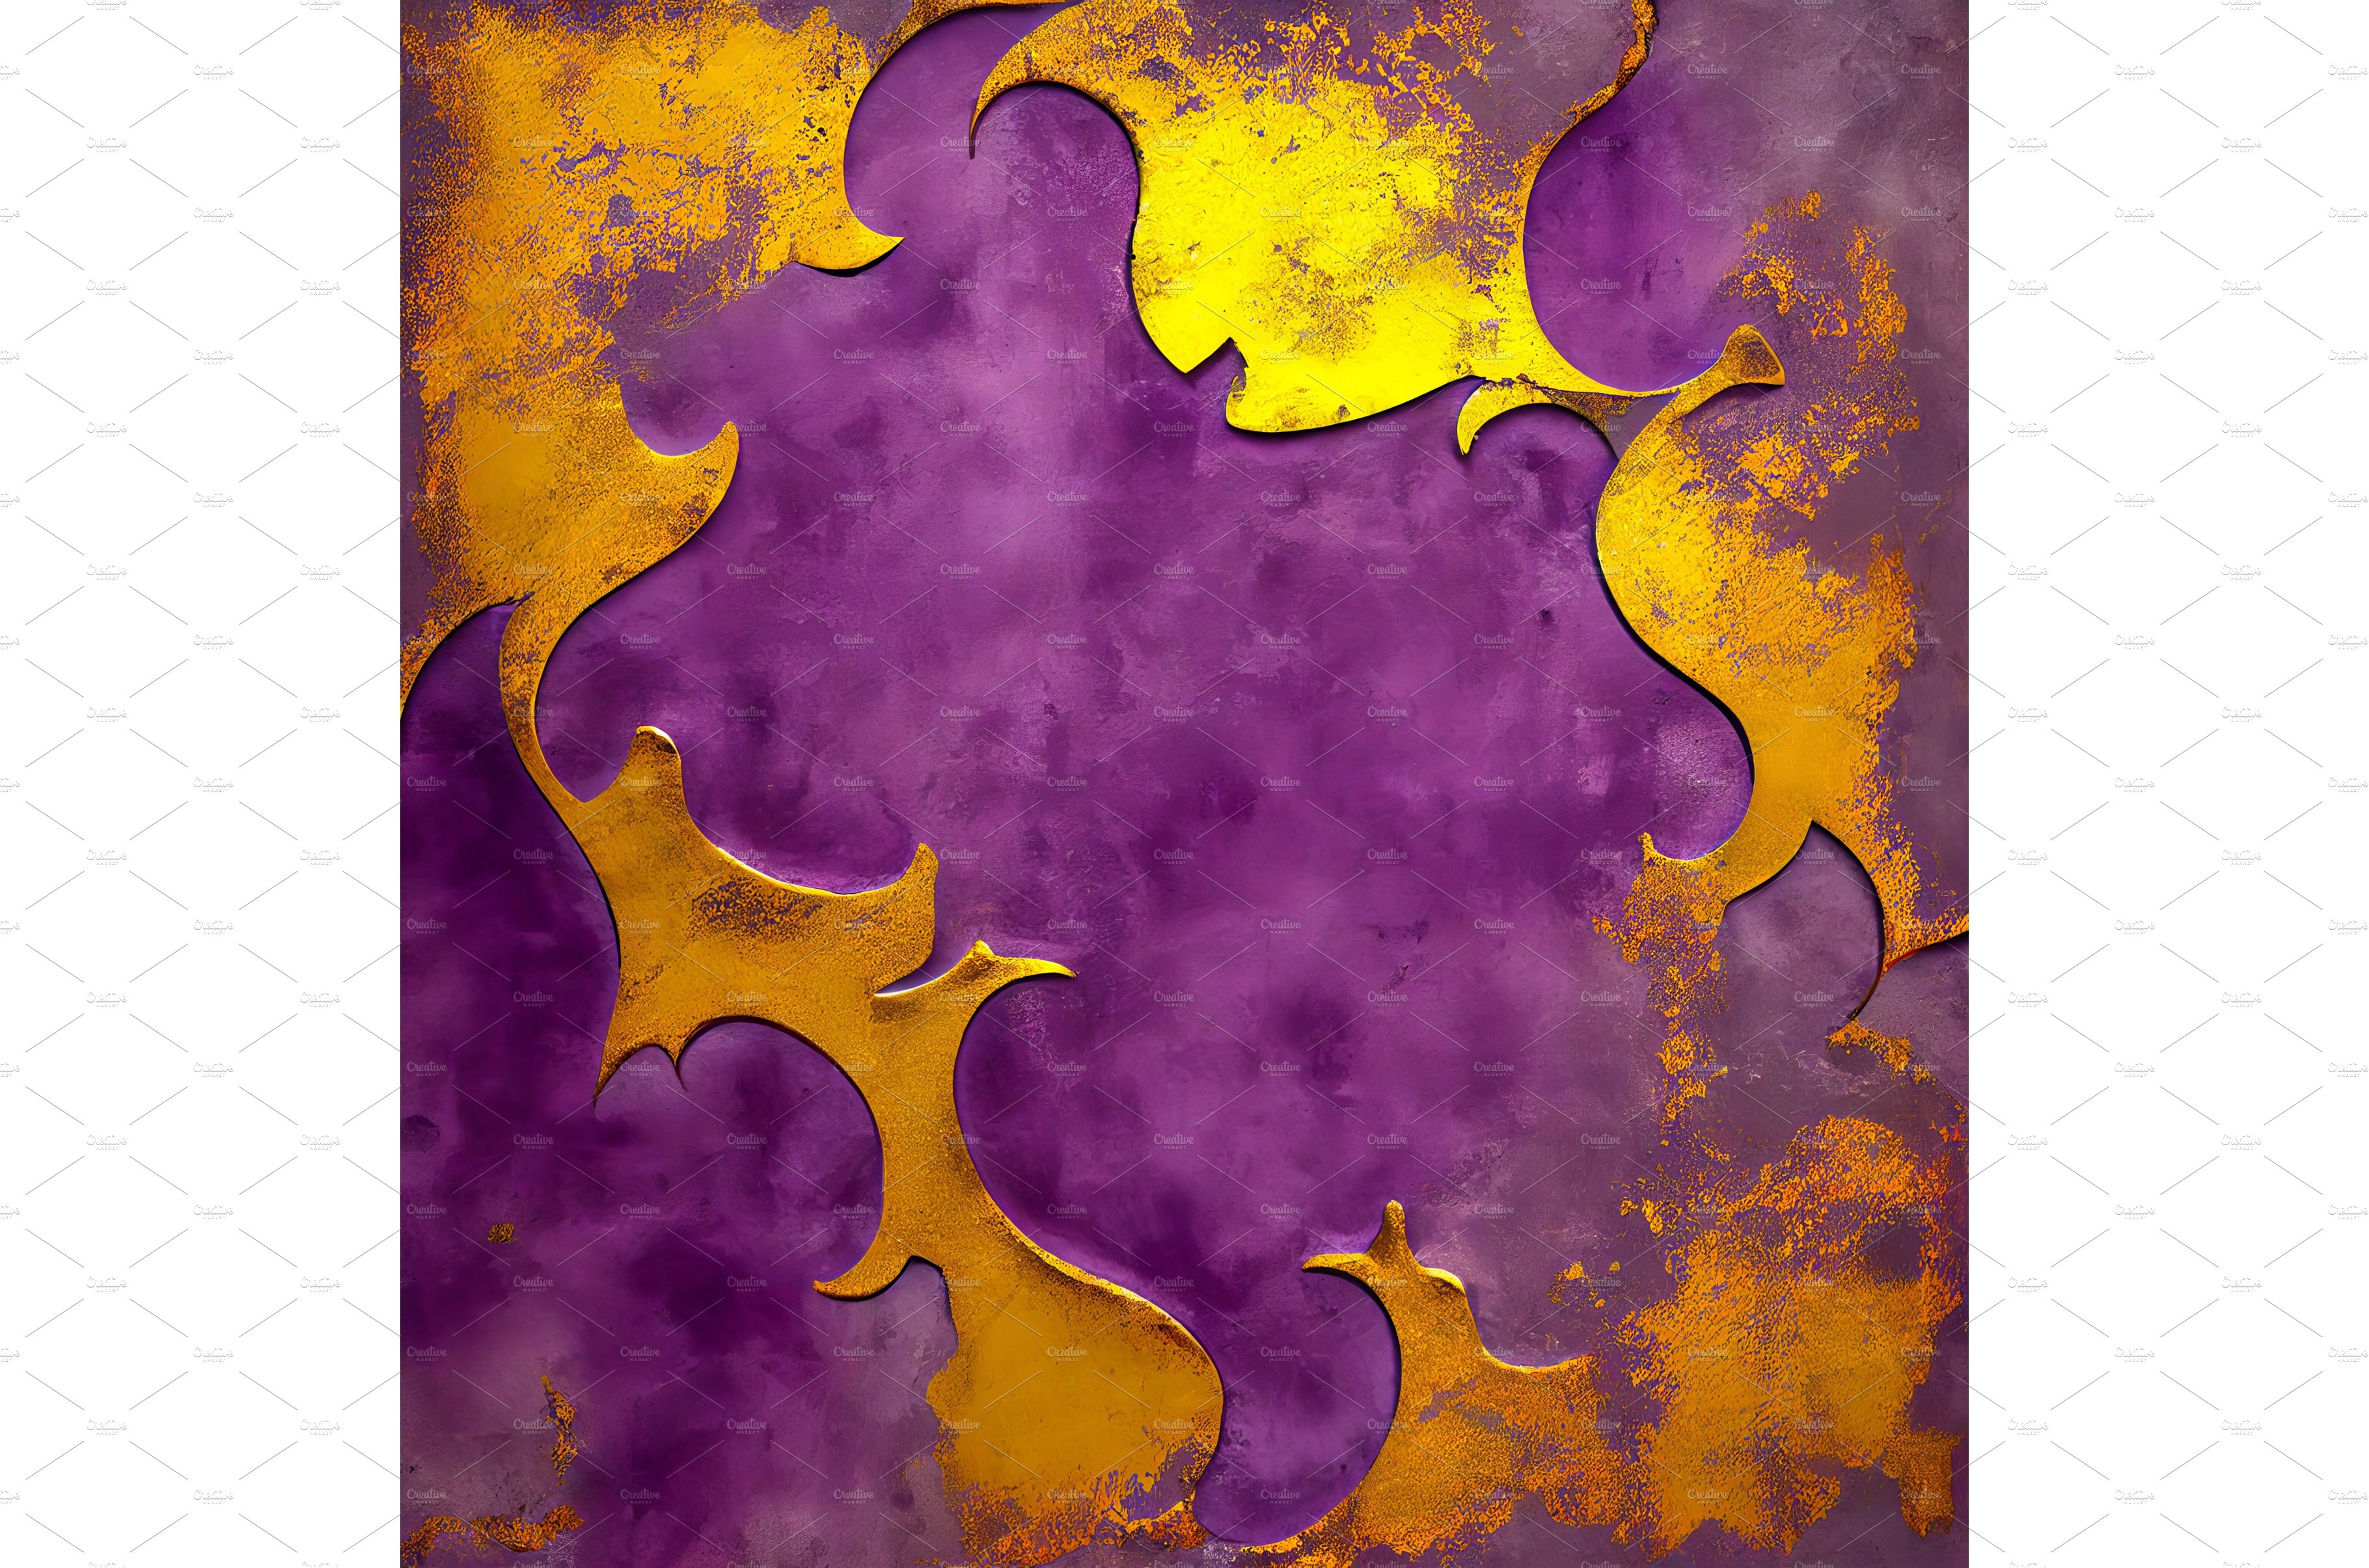 Violet and gold venetian plaster cover image.